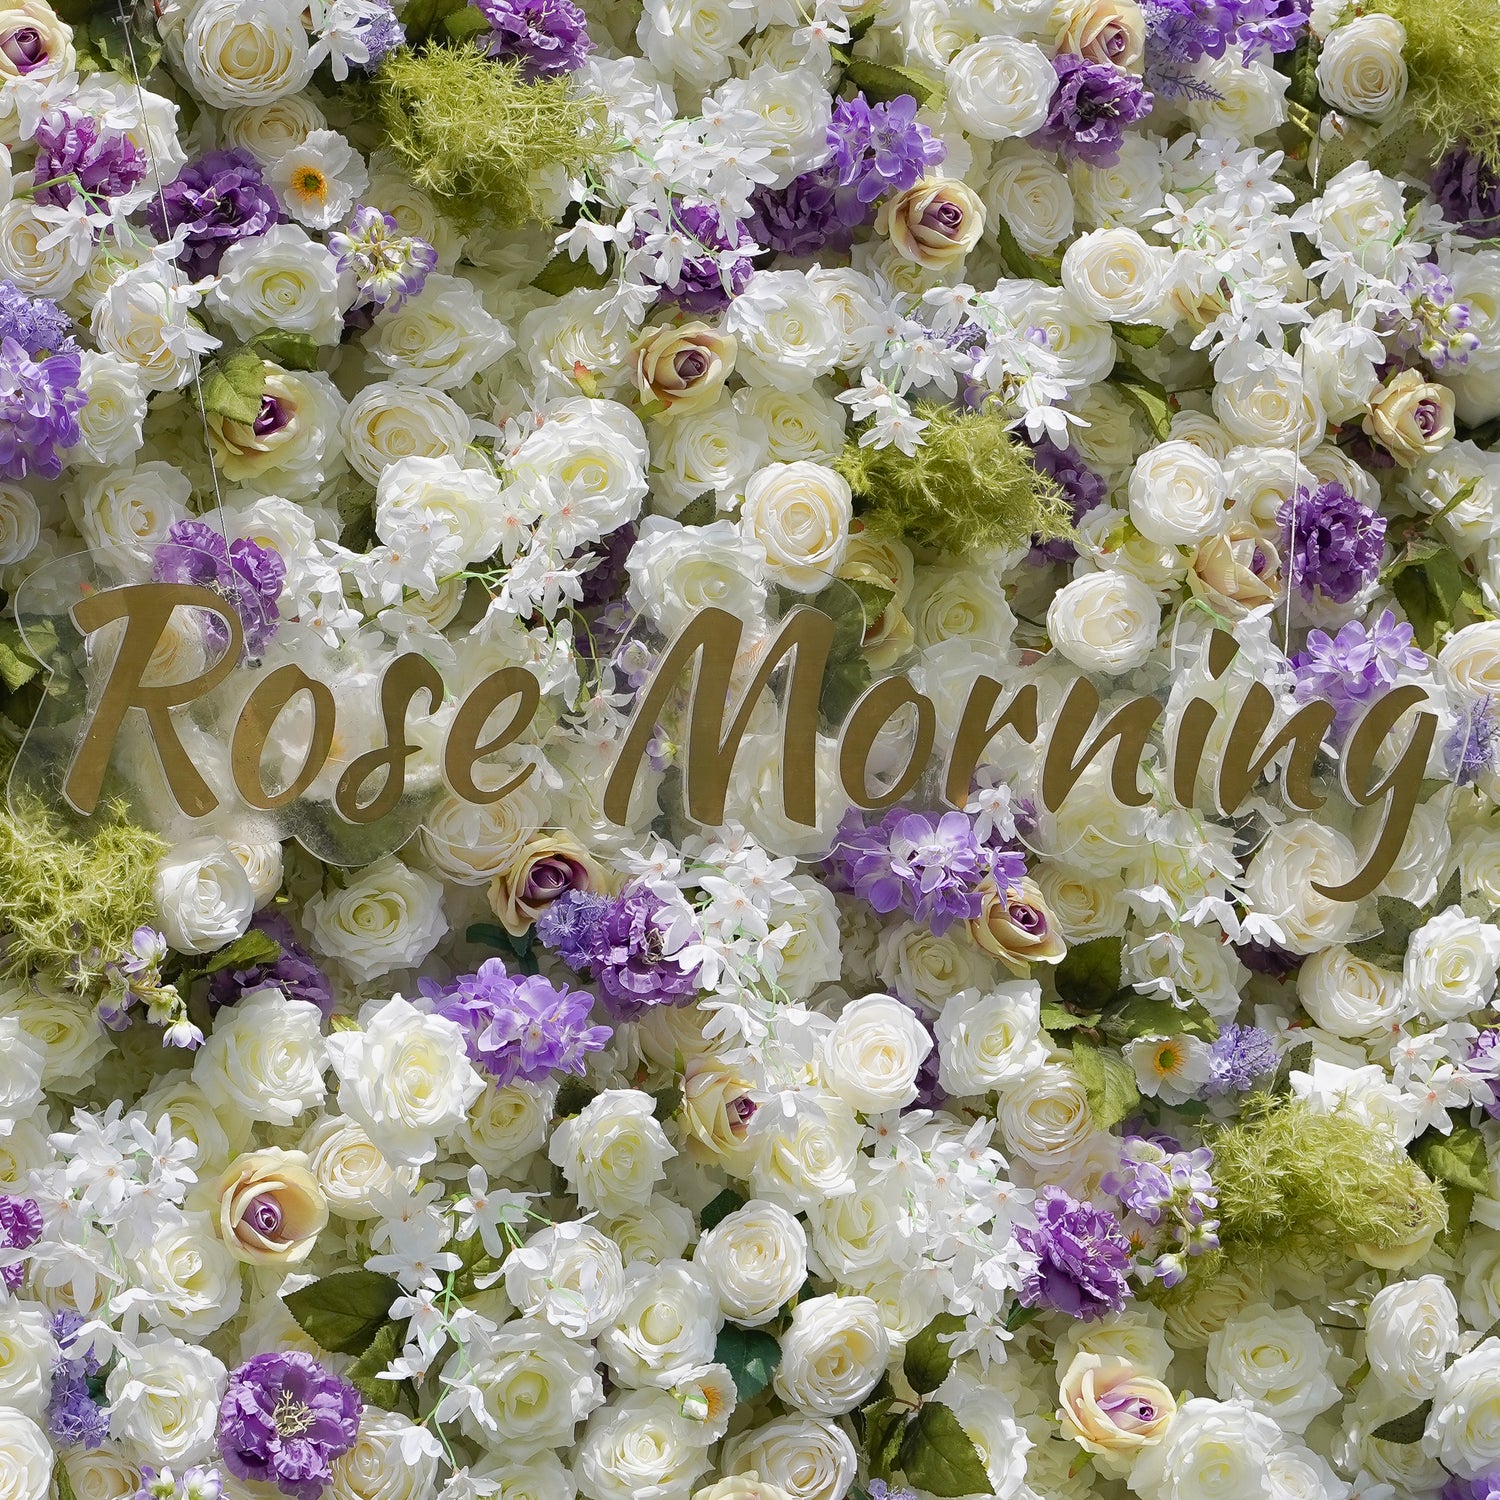 Lilianne: 5D Fabric Artificial Rolling up Flower Wall  Curtain Flower Wall R962 - 8ft*8ft Rose Morning